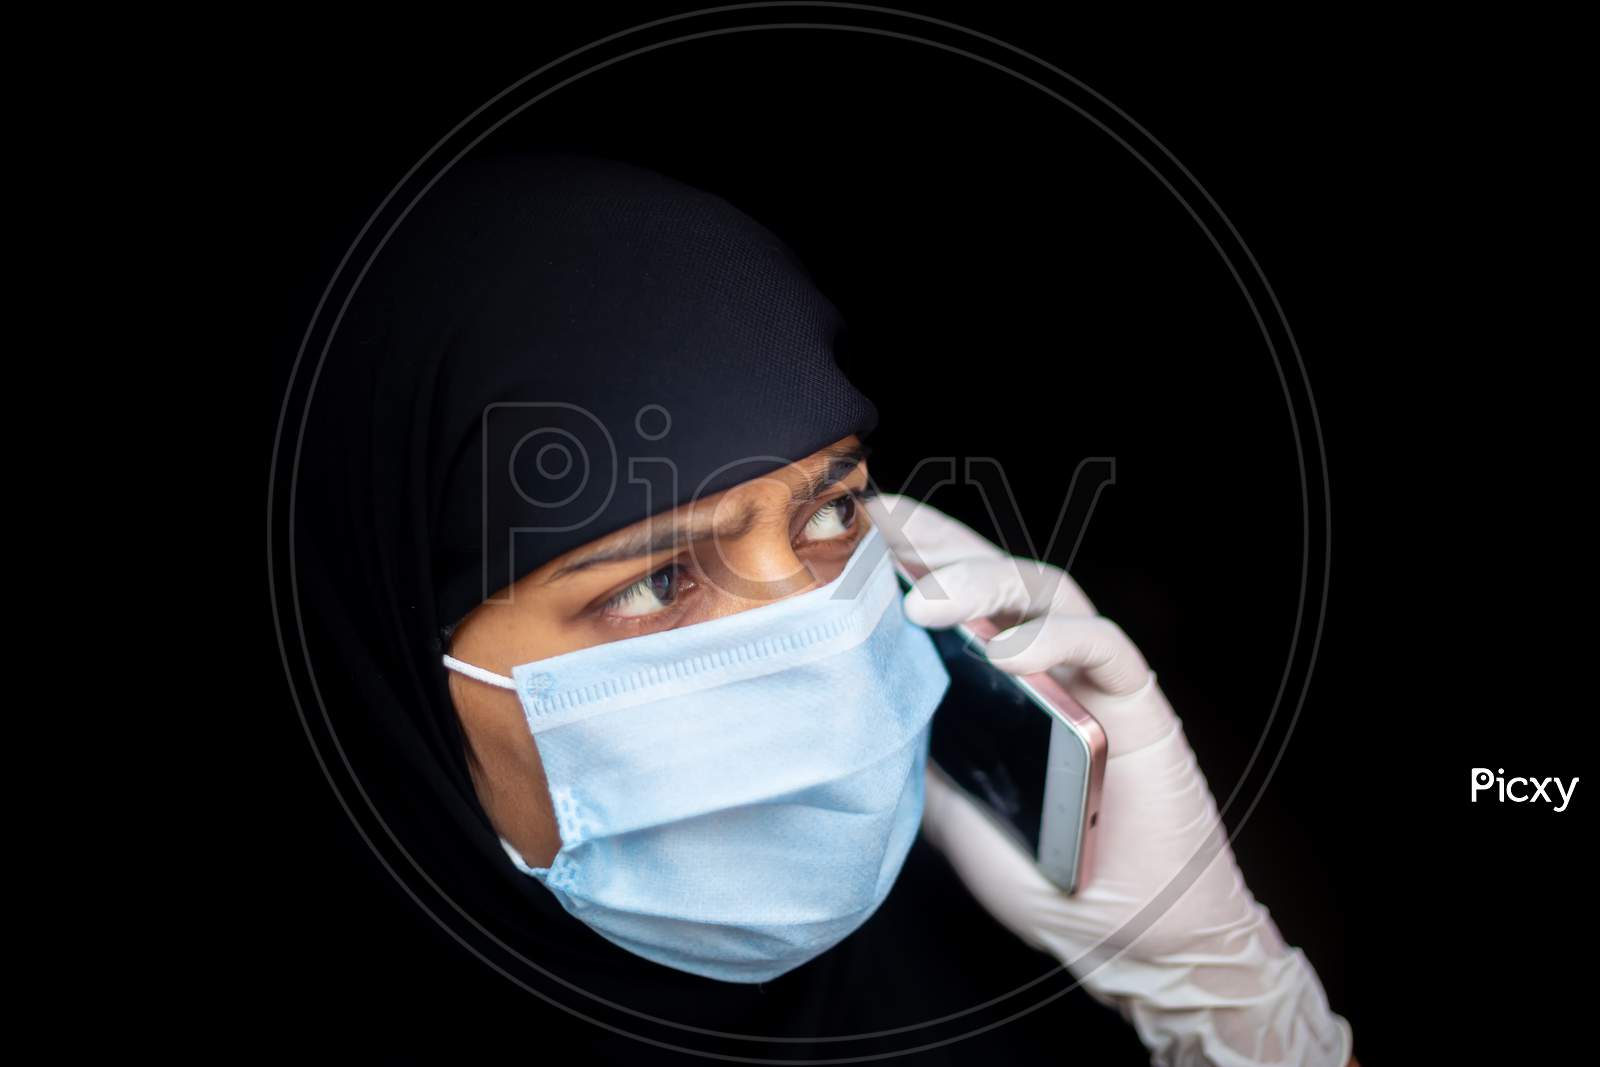 A Muslim Girl Wearing A Safety Mask And Gloves Is Talking On Her Smartphone. Black Hijab Woman Wearing A Blue Mask For Coronavirus Safety.